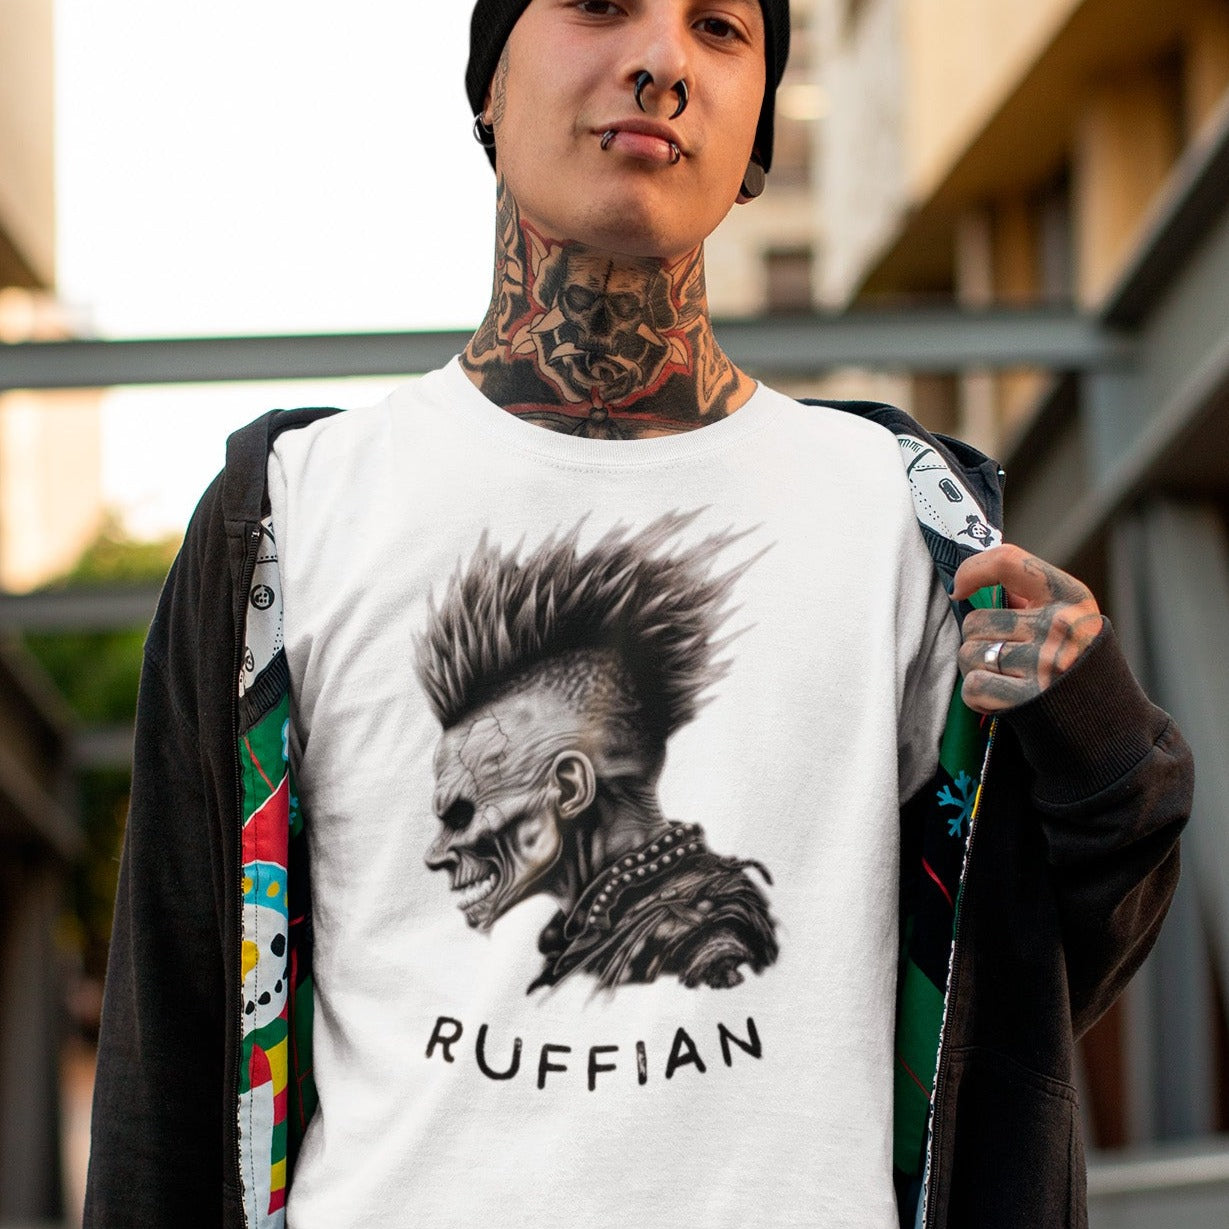 punk-persona-black-t-shirt-mockup-of-an-edgy-man-smirking-while-showing-off-his-tee